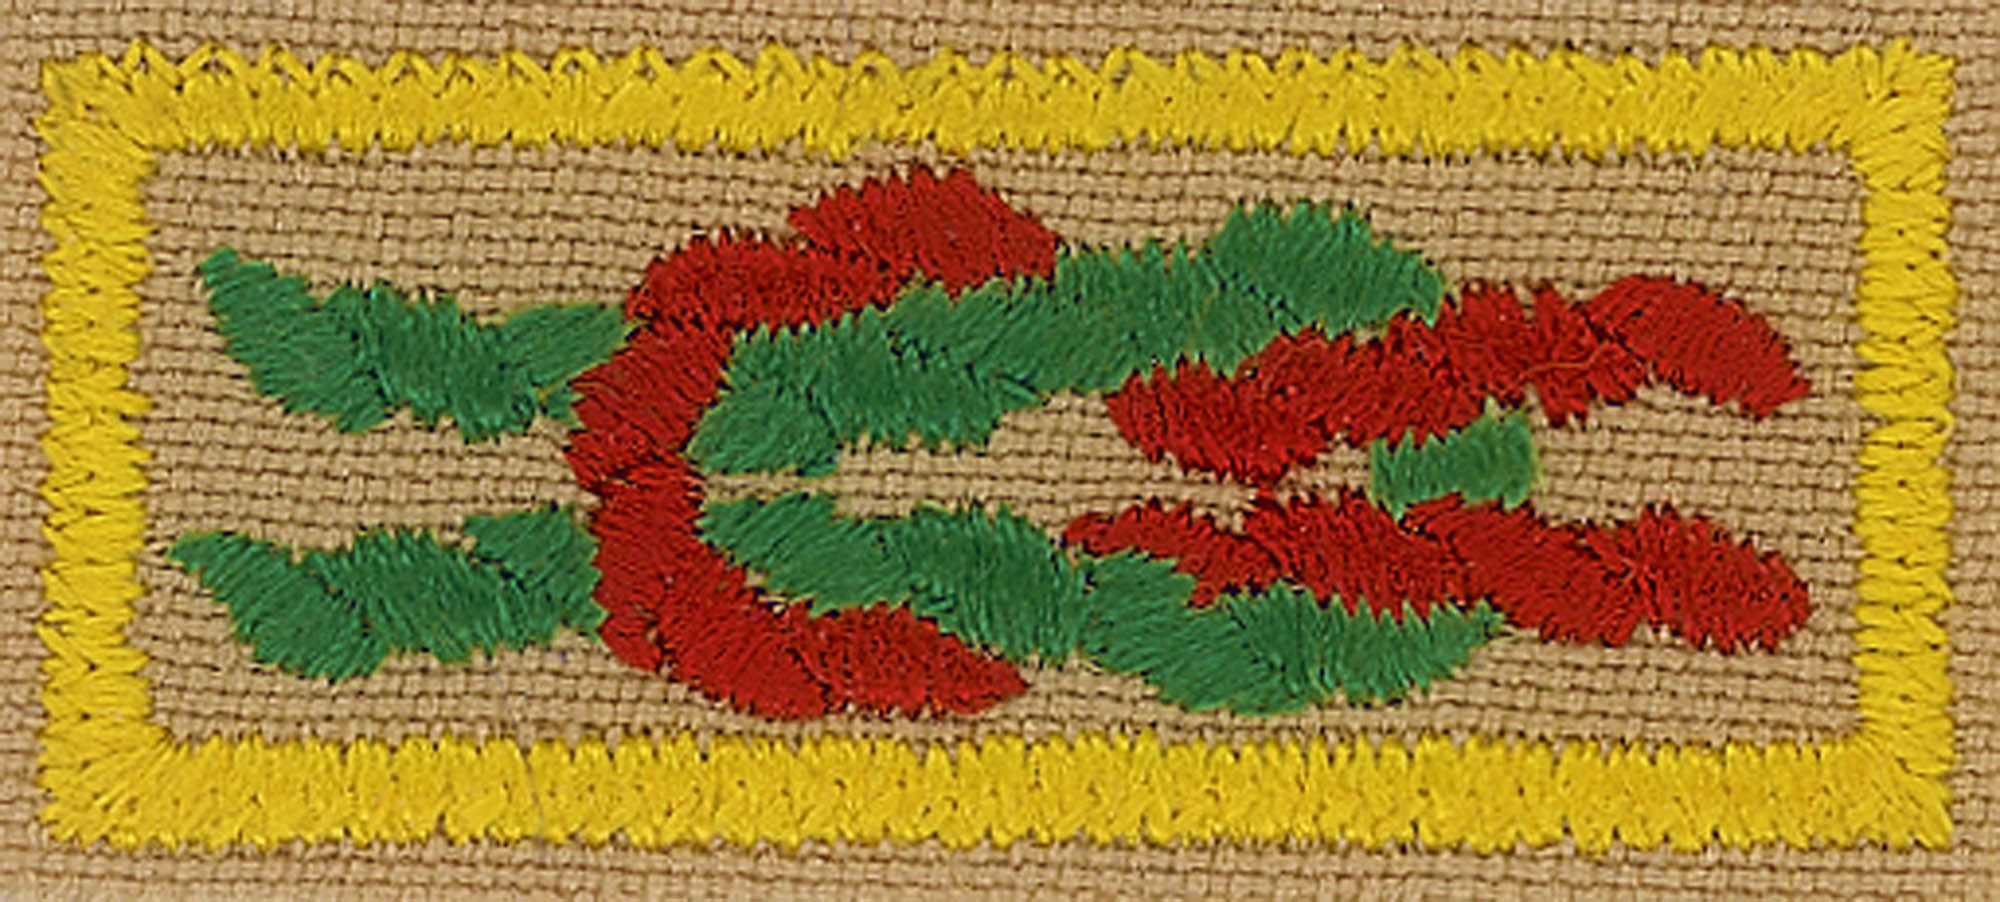 Current Issue Boy Scout Arrow Of Light Award Knot 